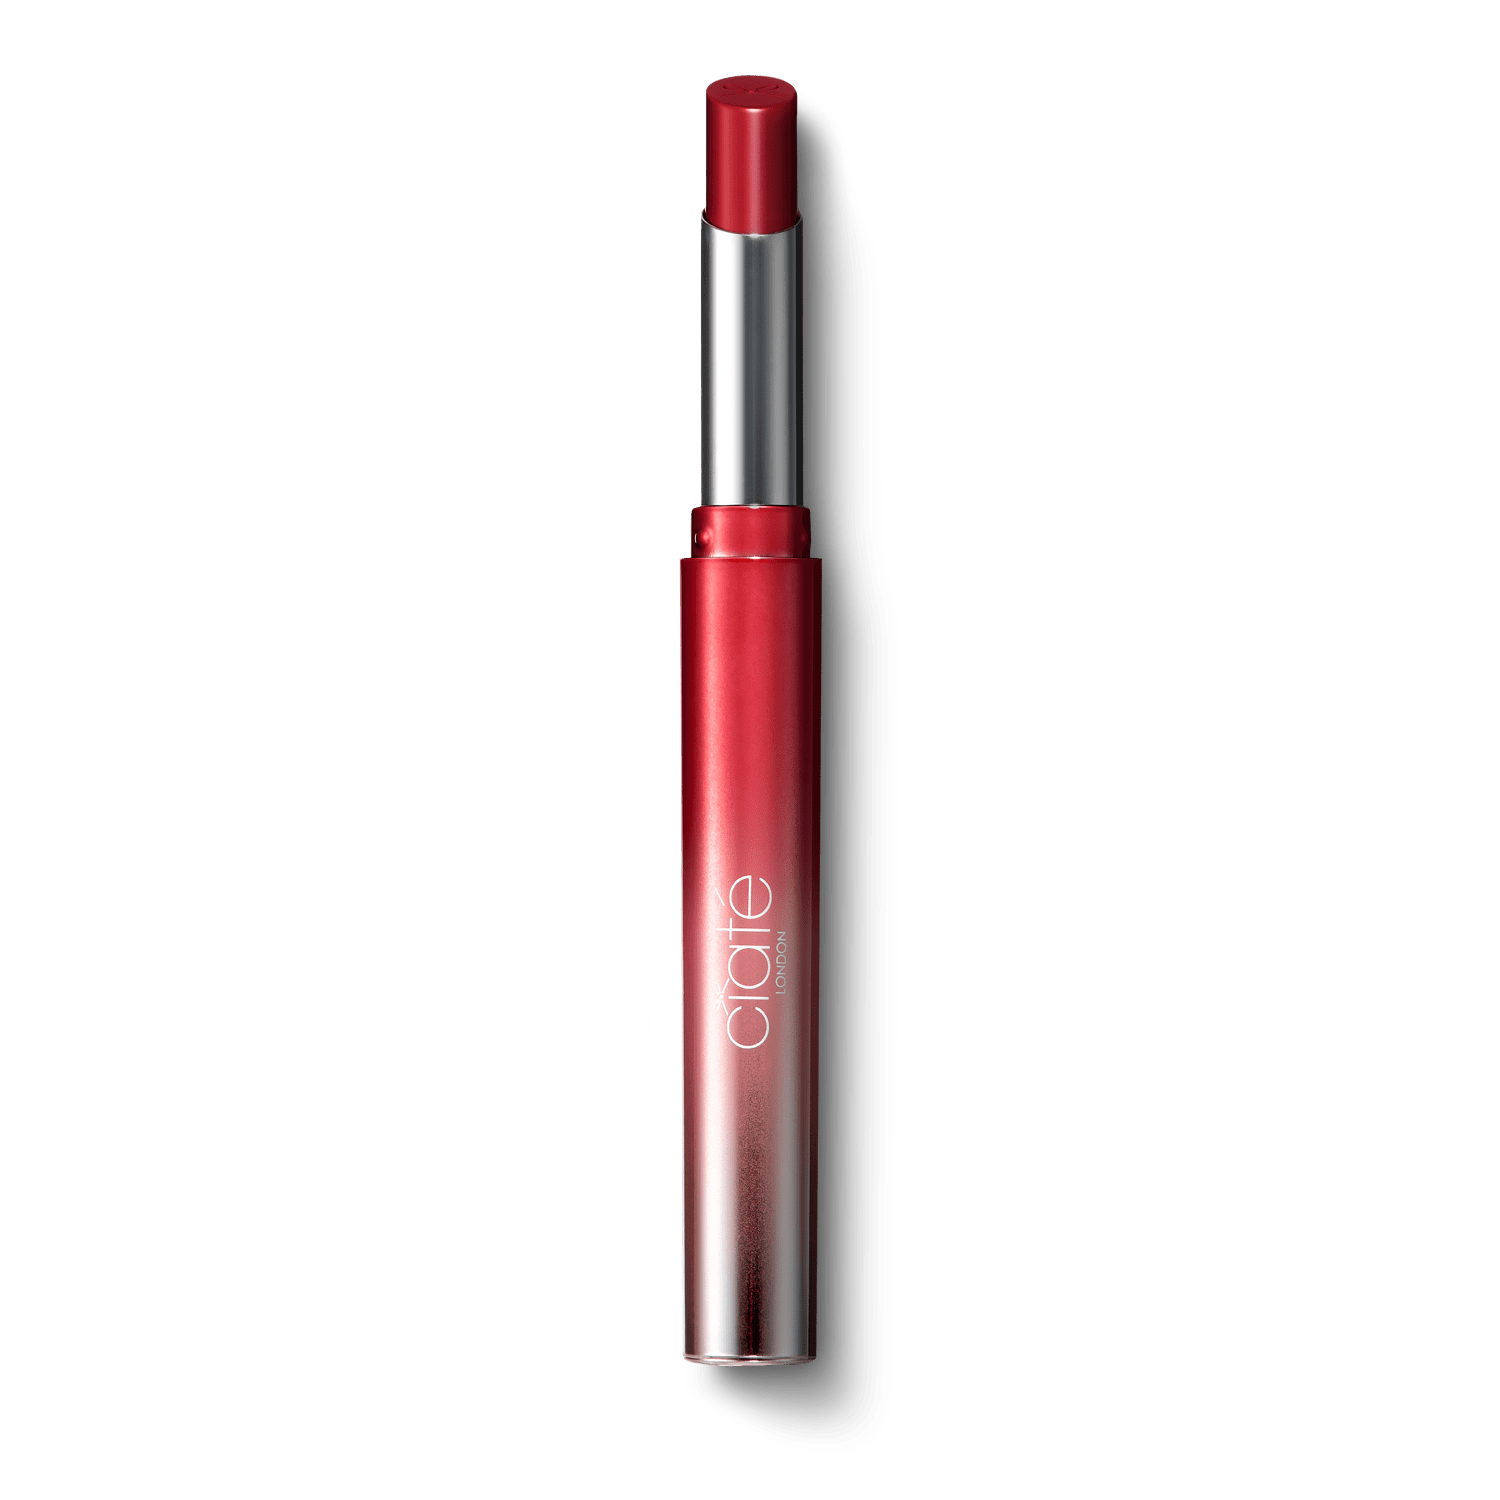 Ruby - Classic Red